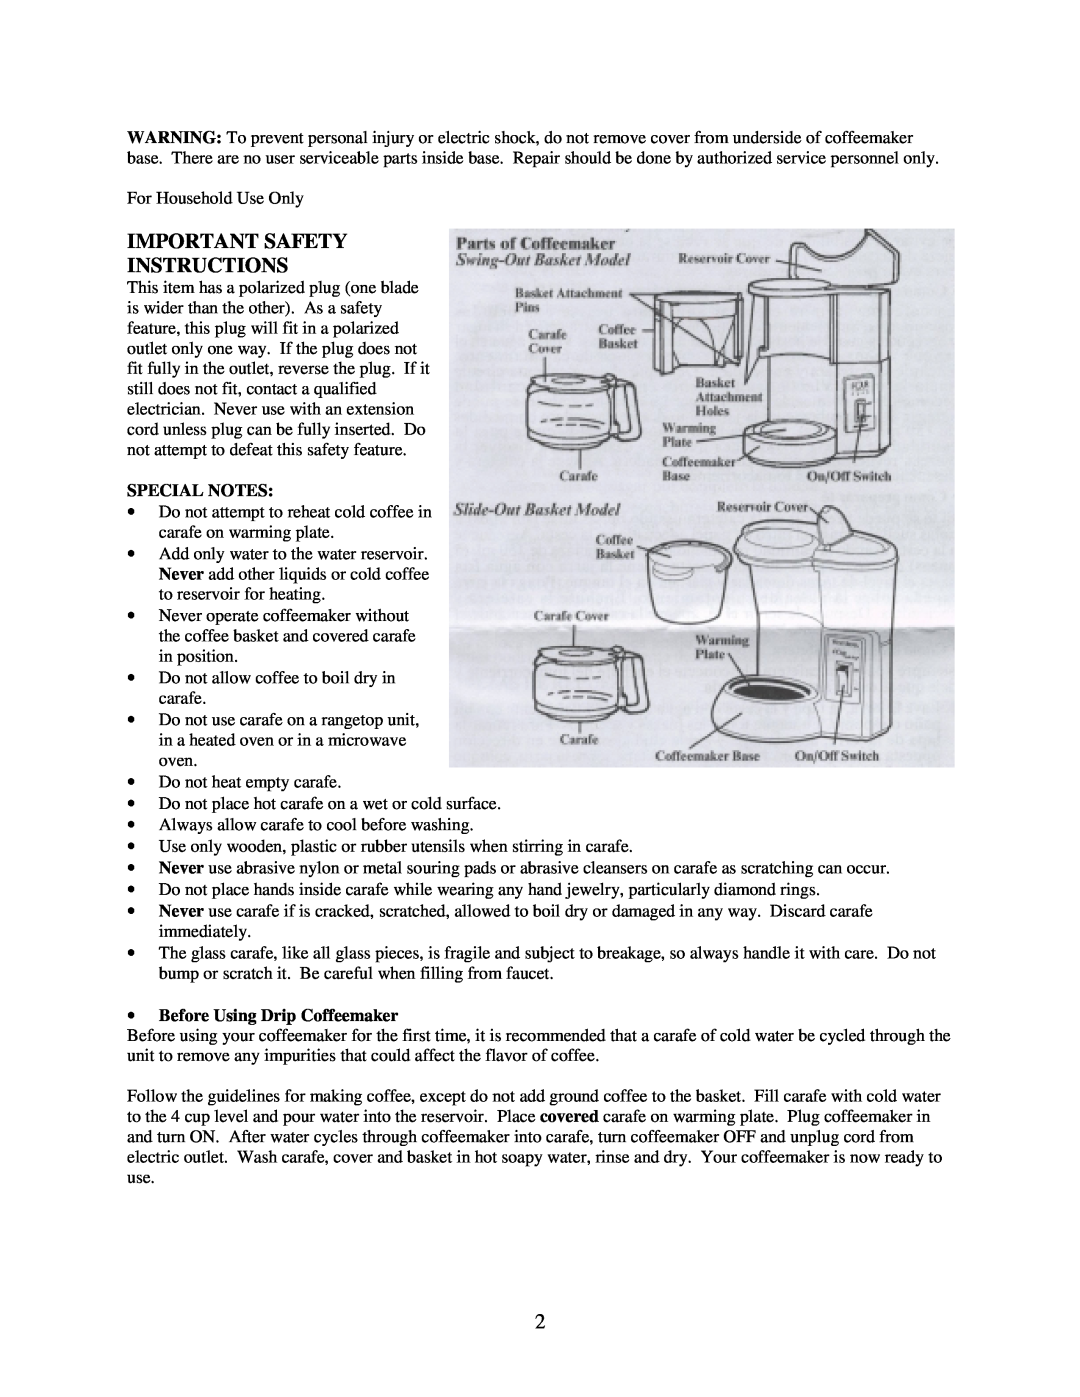 West Bend L-5227 instruction manual Important Safety Instructions, Special Notes, •Before Using Drip Coffeemaker 